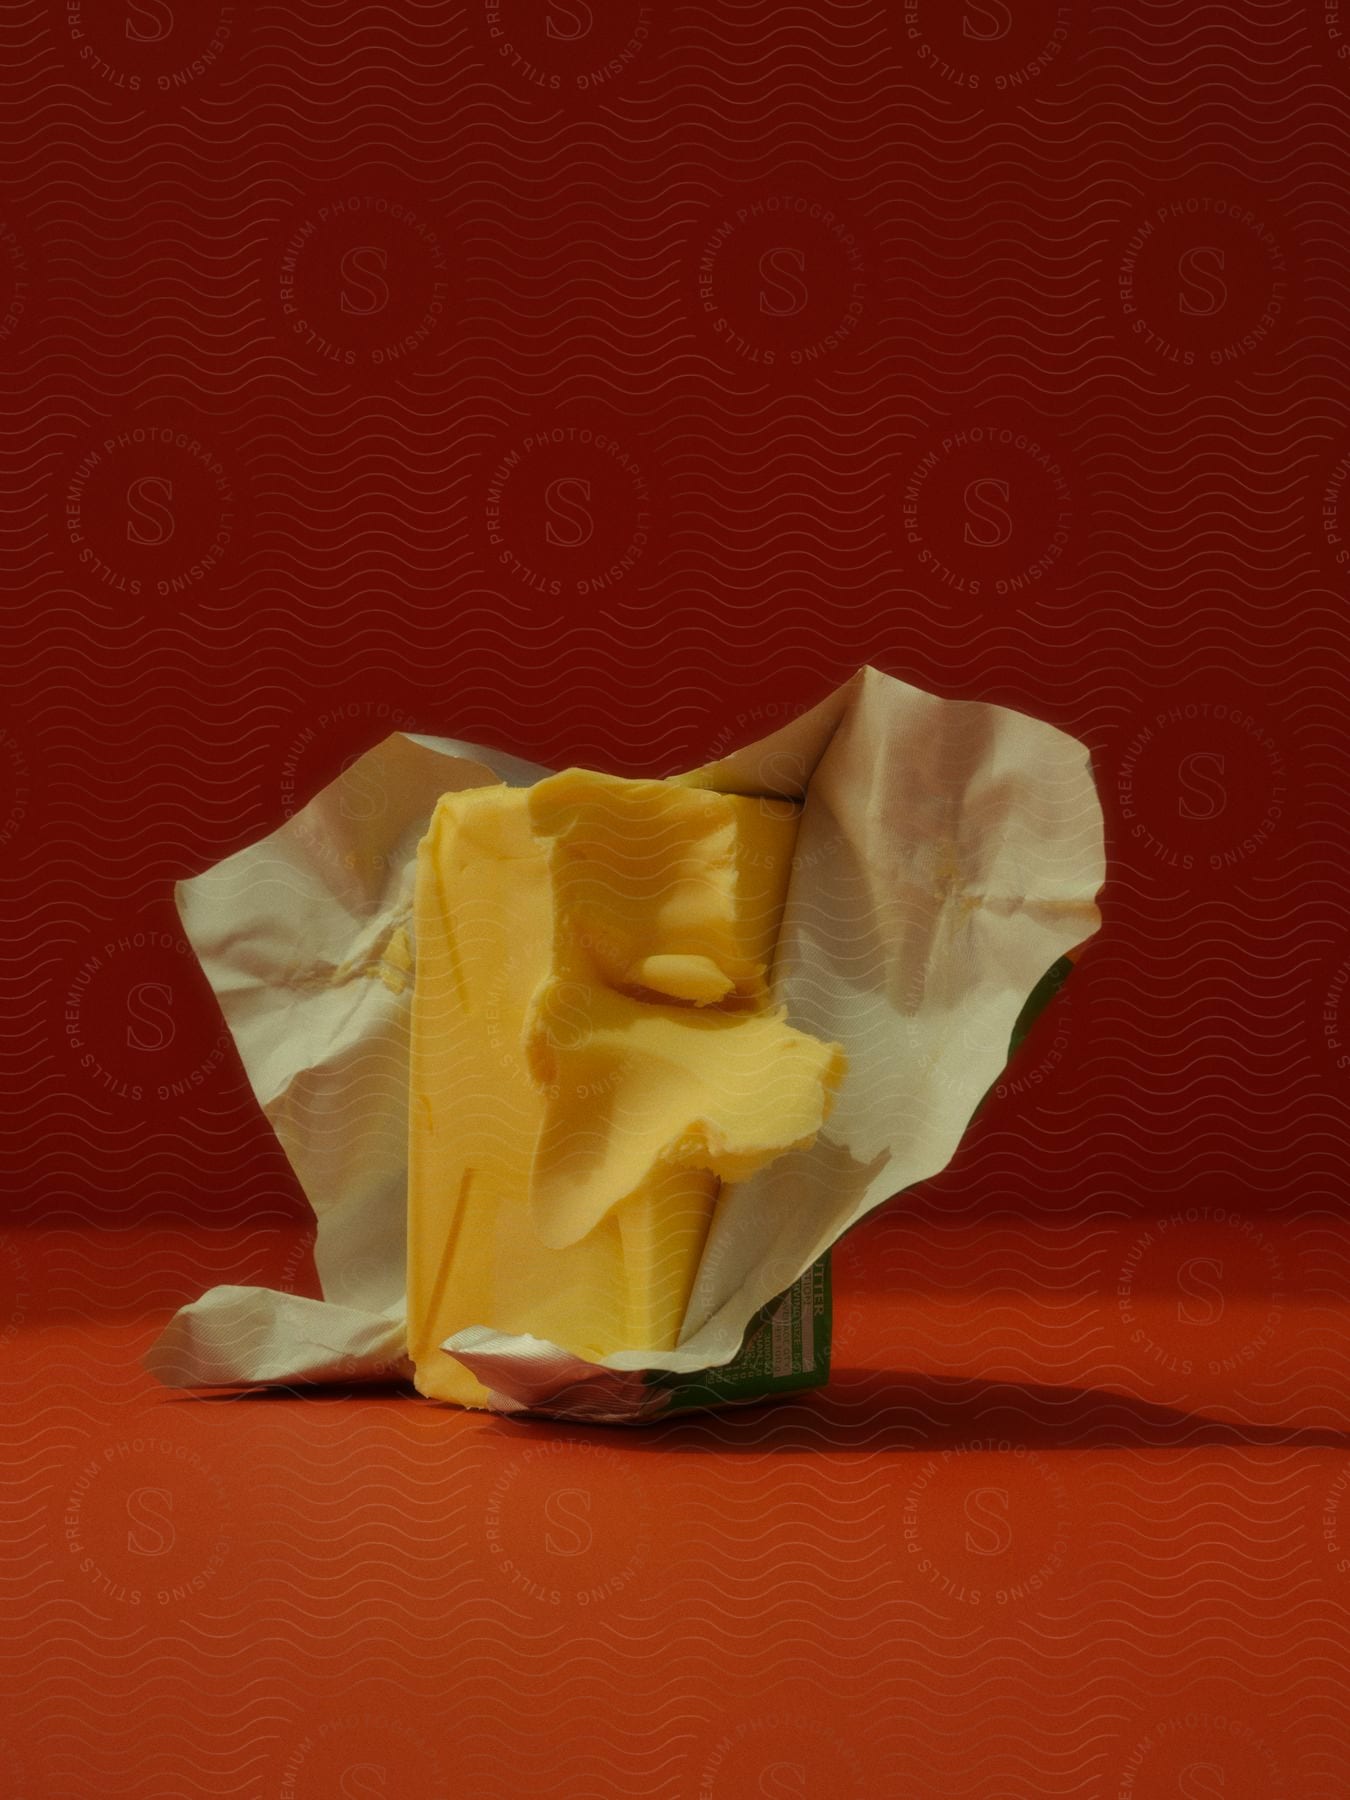 A golden block of butter sits on a red table with a faint checkered pattern